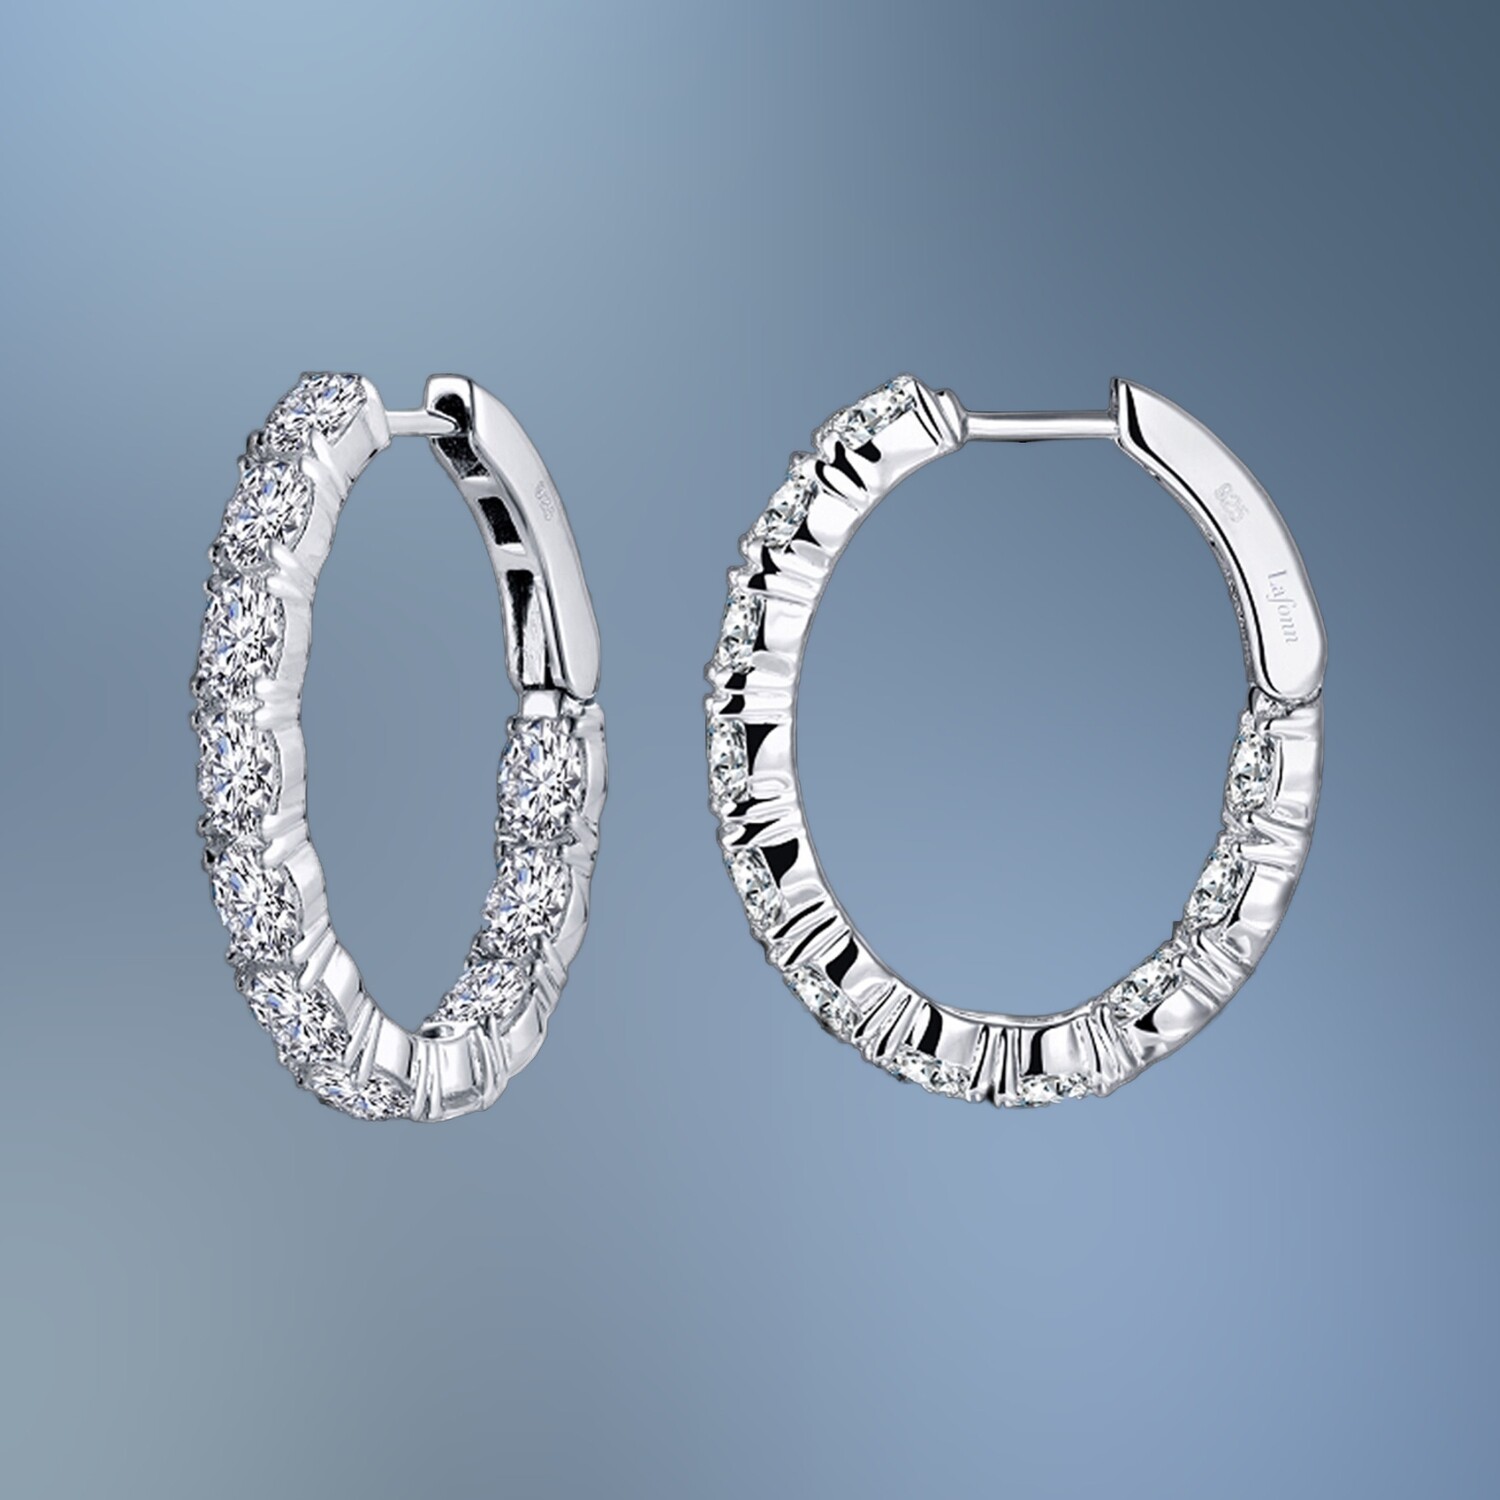 14KT WHITE GOLD INSIDE/OUTSIDE DIAMOND HOOP EARRINGS FEATURING 50 ROUND BRILLIANT CUT DIAMONDS TOTALING 0.88 CTS